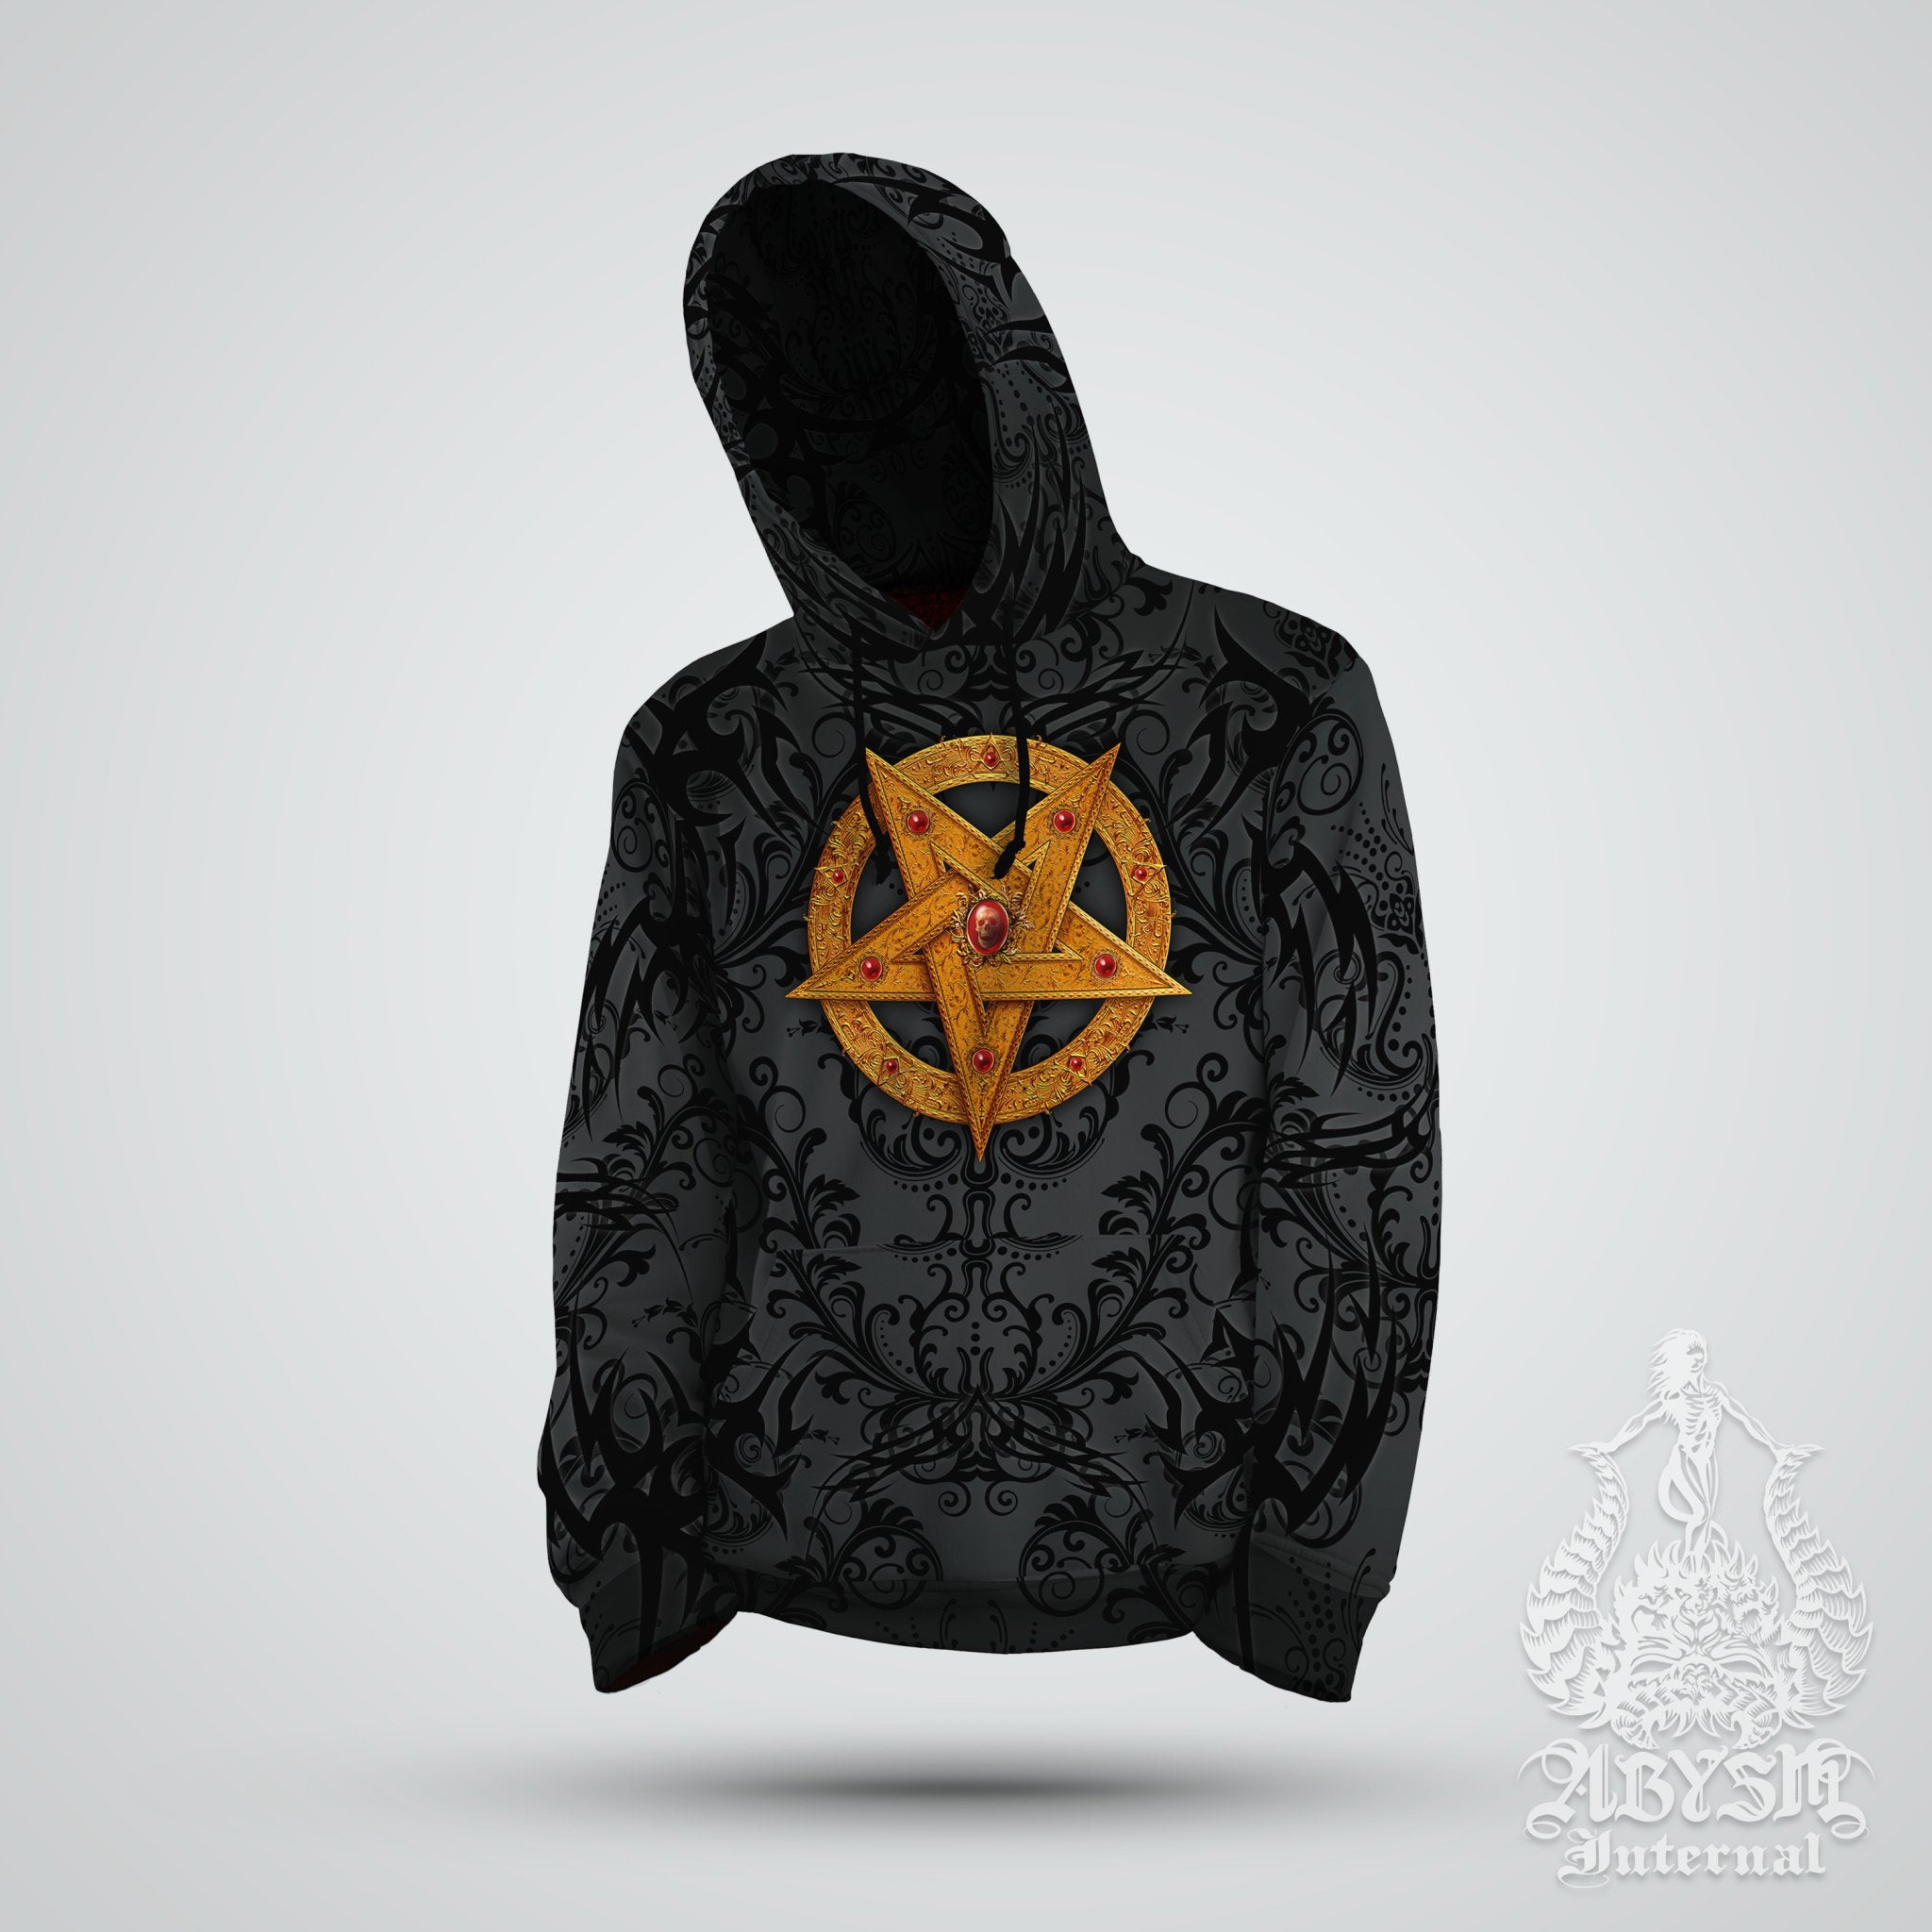 Gold Pentagram Hoodie, Black Metal Streetwear, Gothic Sweater, Satanic Goth Outfit, Alternative Clothing, Unisex - Red or Black, 2 Colors - Abysm Internal